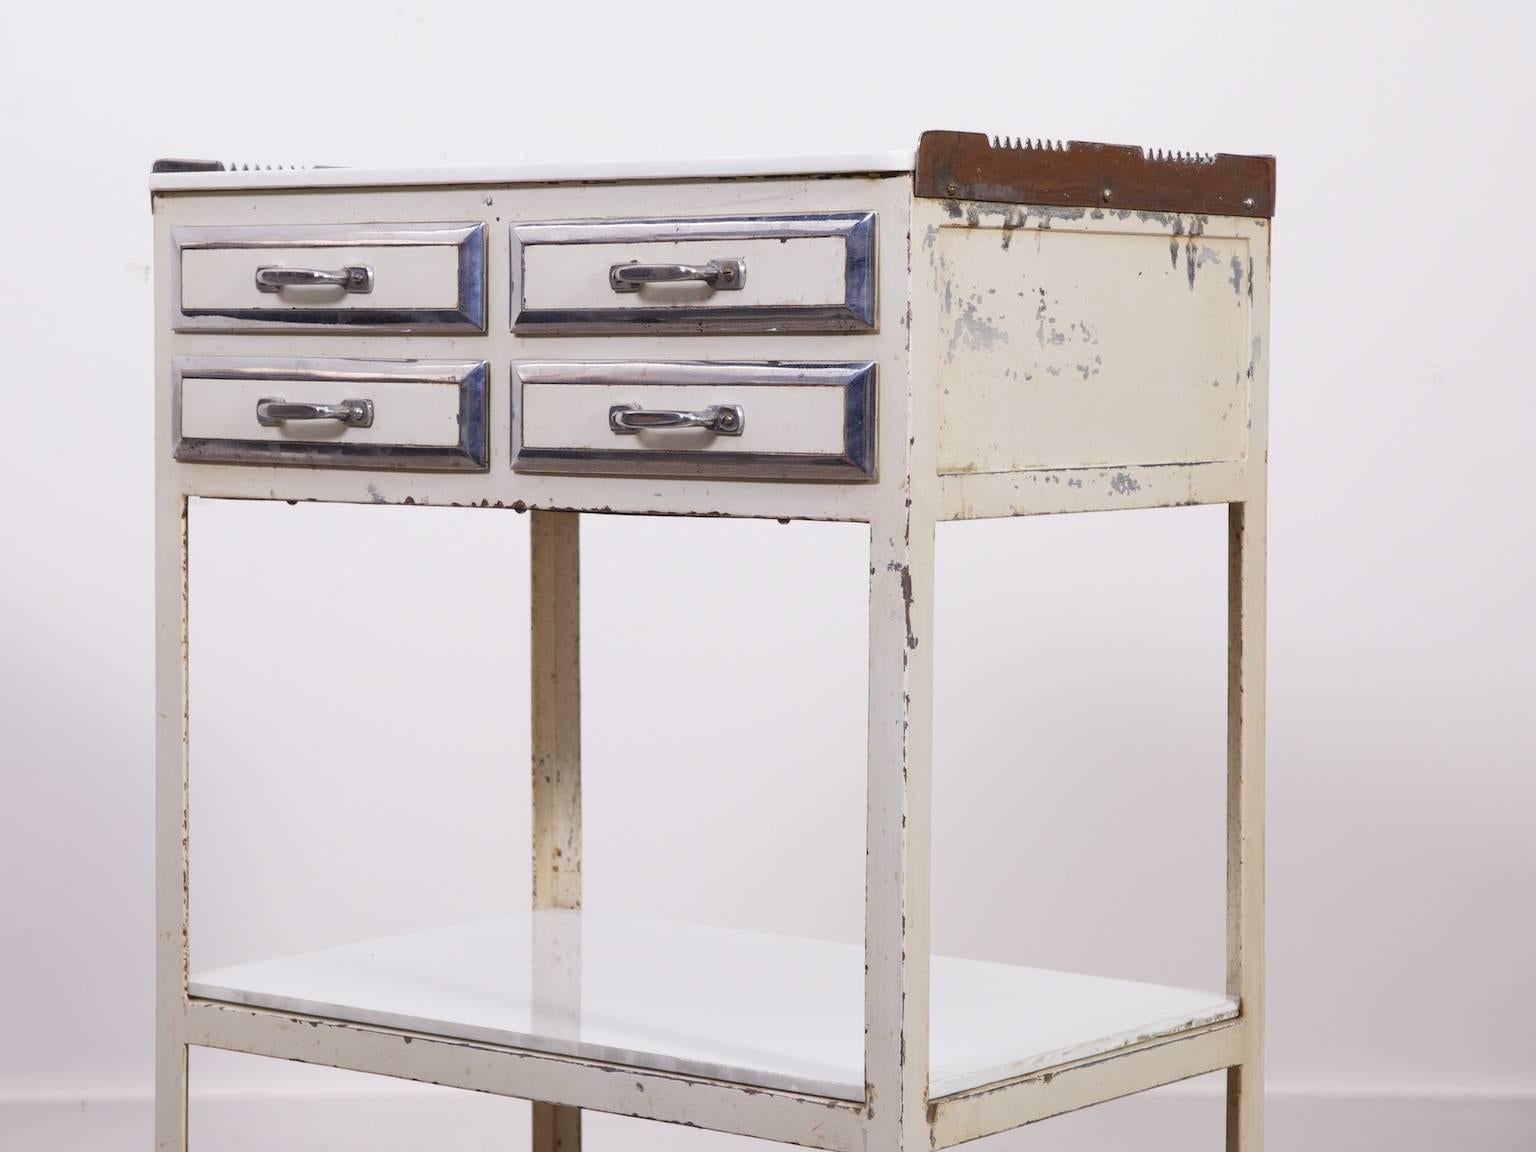 Painted steel dentists trolley.

White vi troilite top and low shelf, four nickel trimmed drawers with glass liners,

1930s.

Super build quality, make a fabulous drinks trolley.